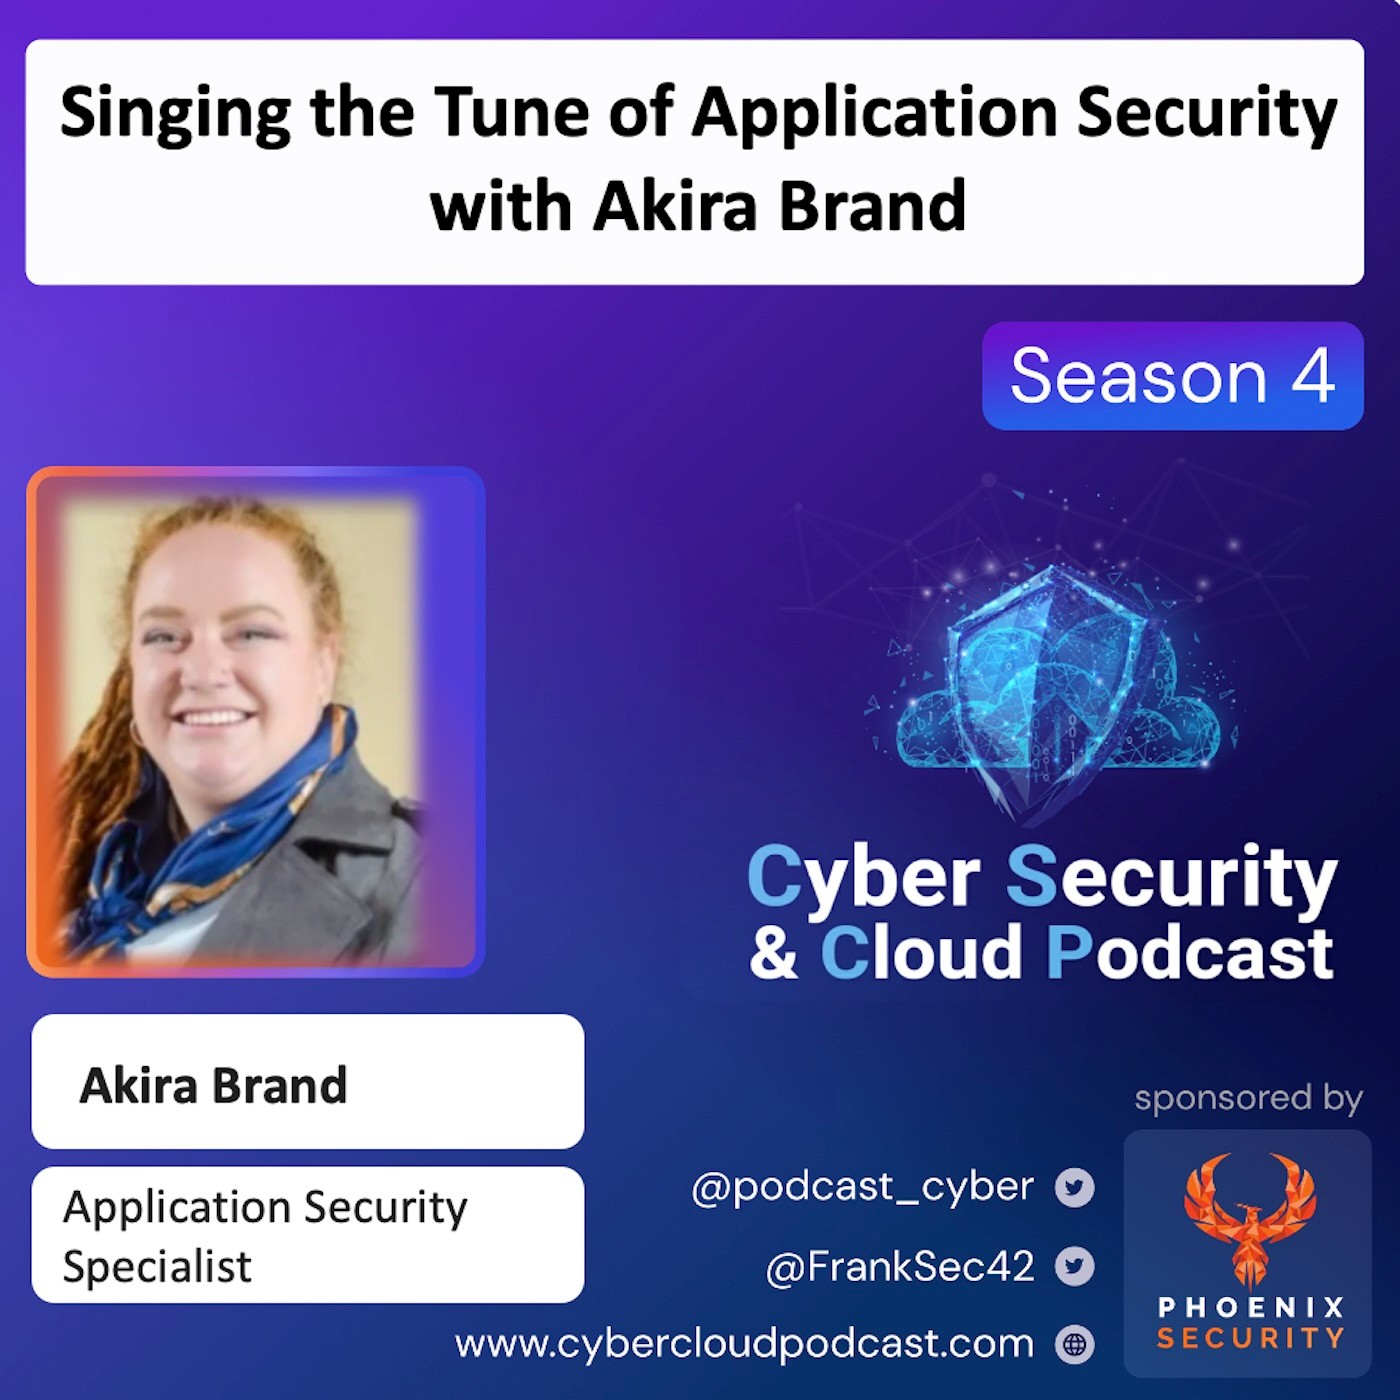 CSCP S4EP15 - Akira Brand - Singing the Tune of Application Security with Akira Brand